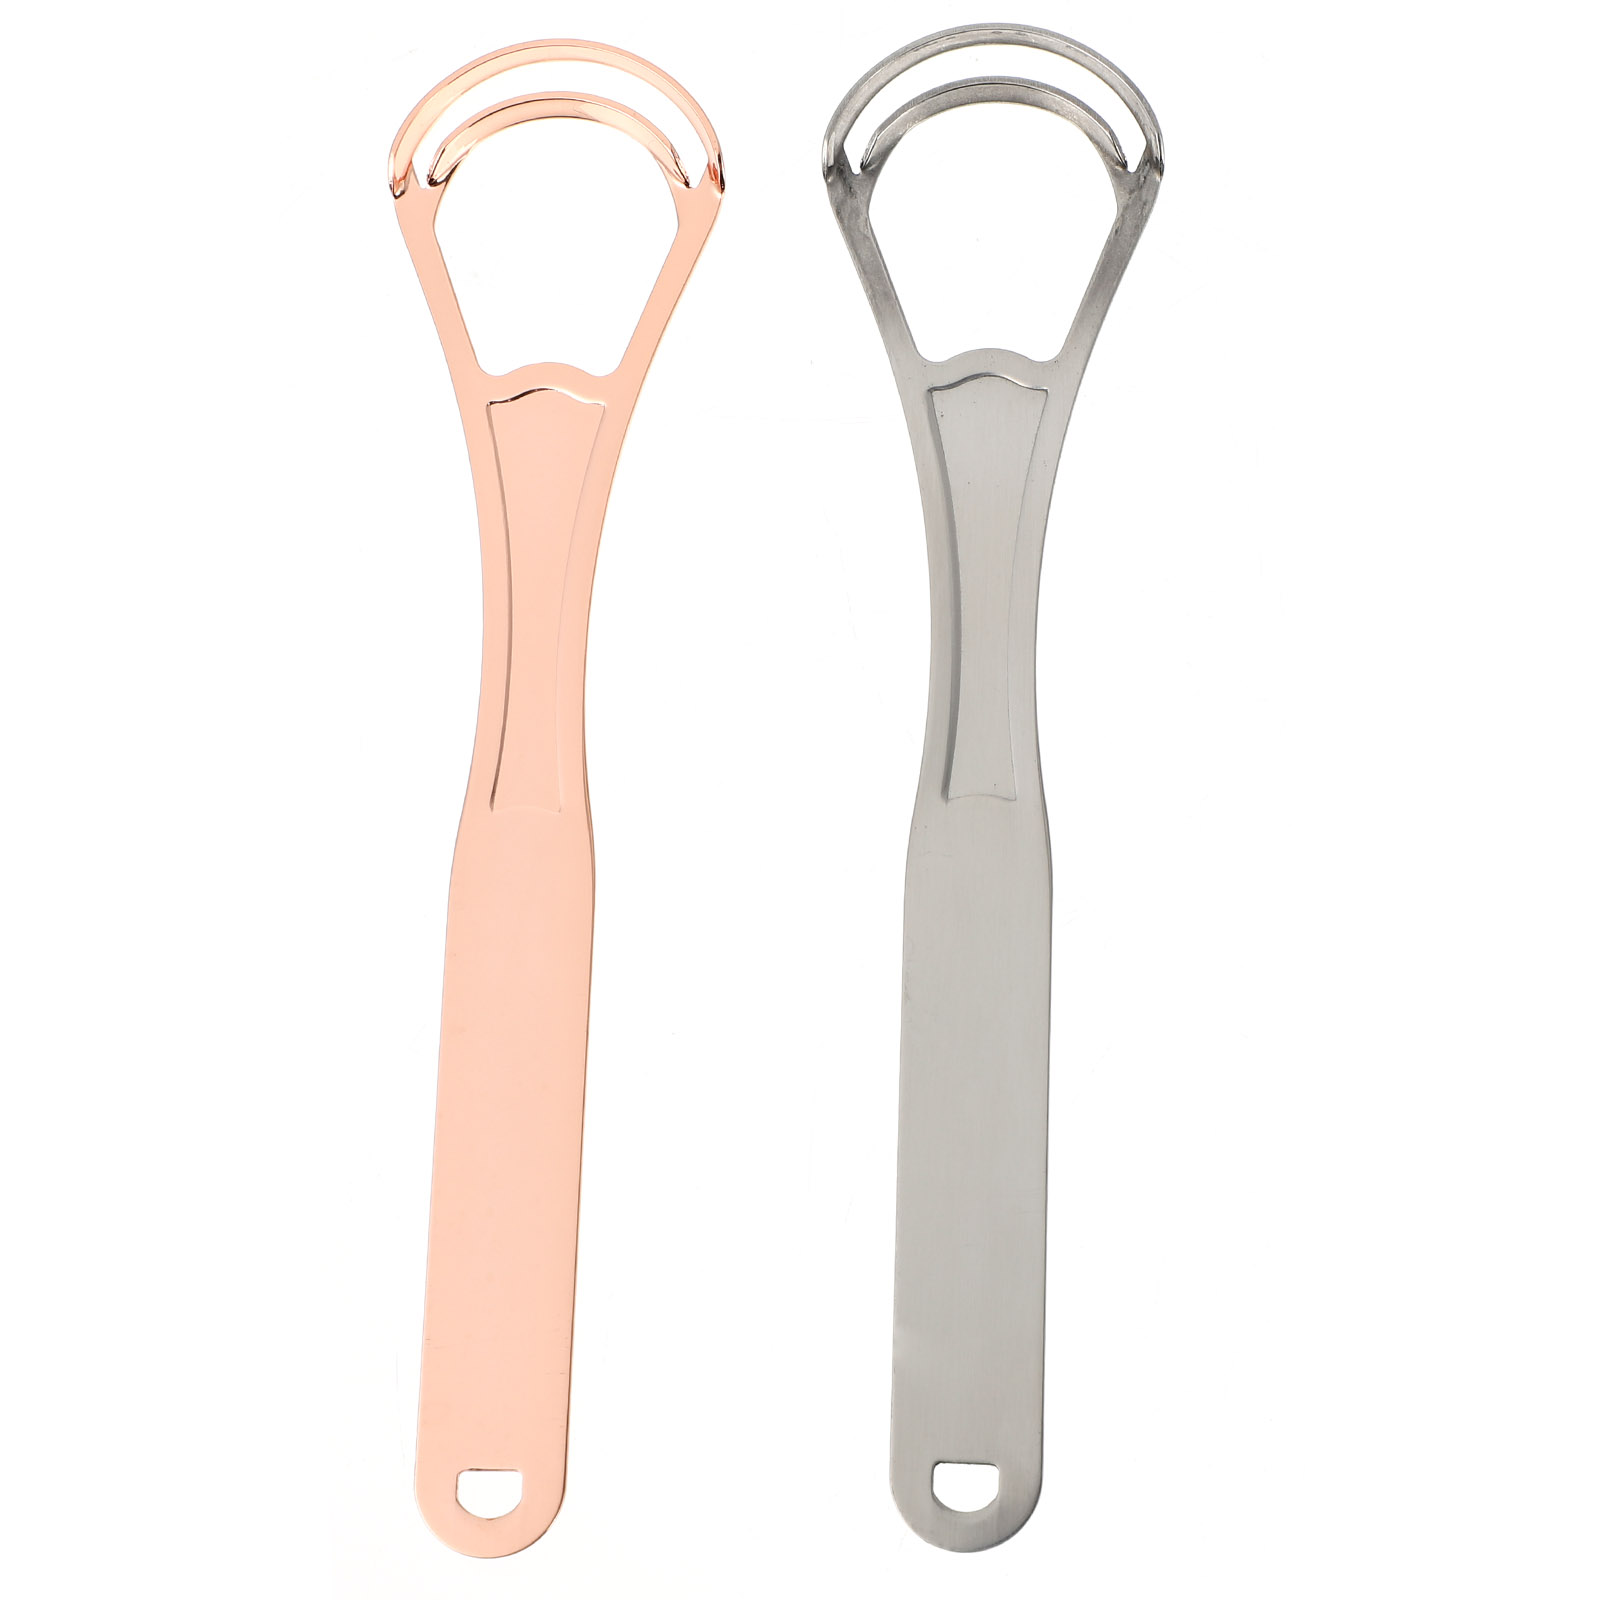 2PCS Safe Practical Tongue Scrapers Stainless Steel Cleaners Tongue Scraping Tools Tongue Cleaners